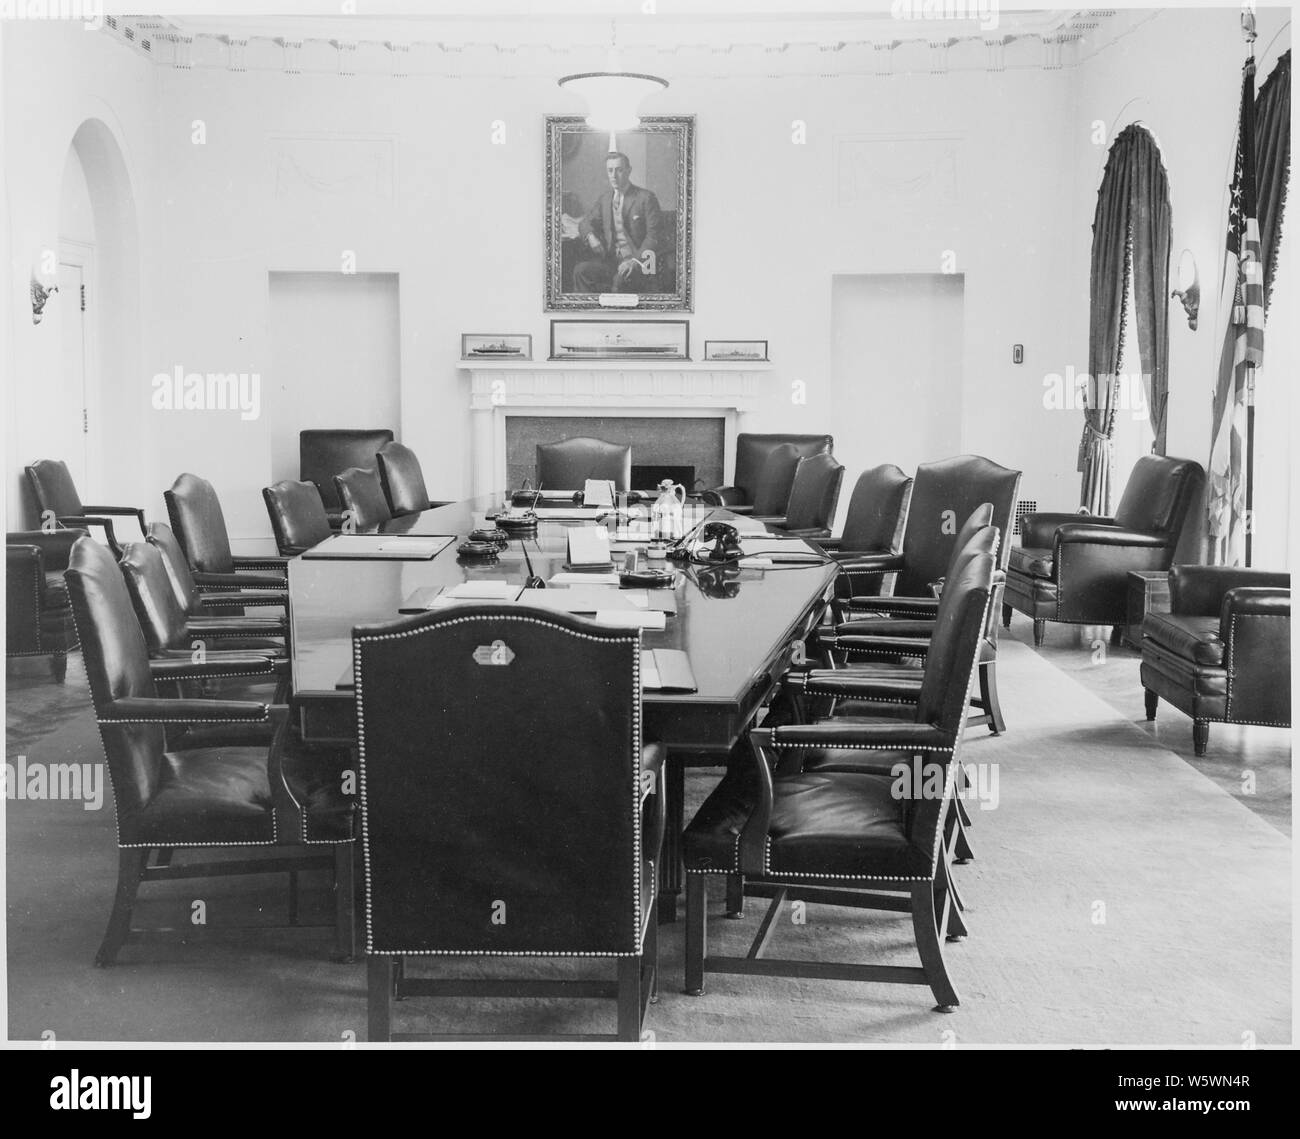 Photograph Of The Cabinet Room Of The White House With A Portrait